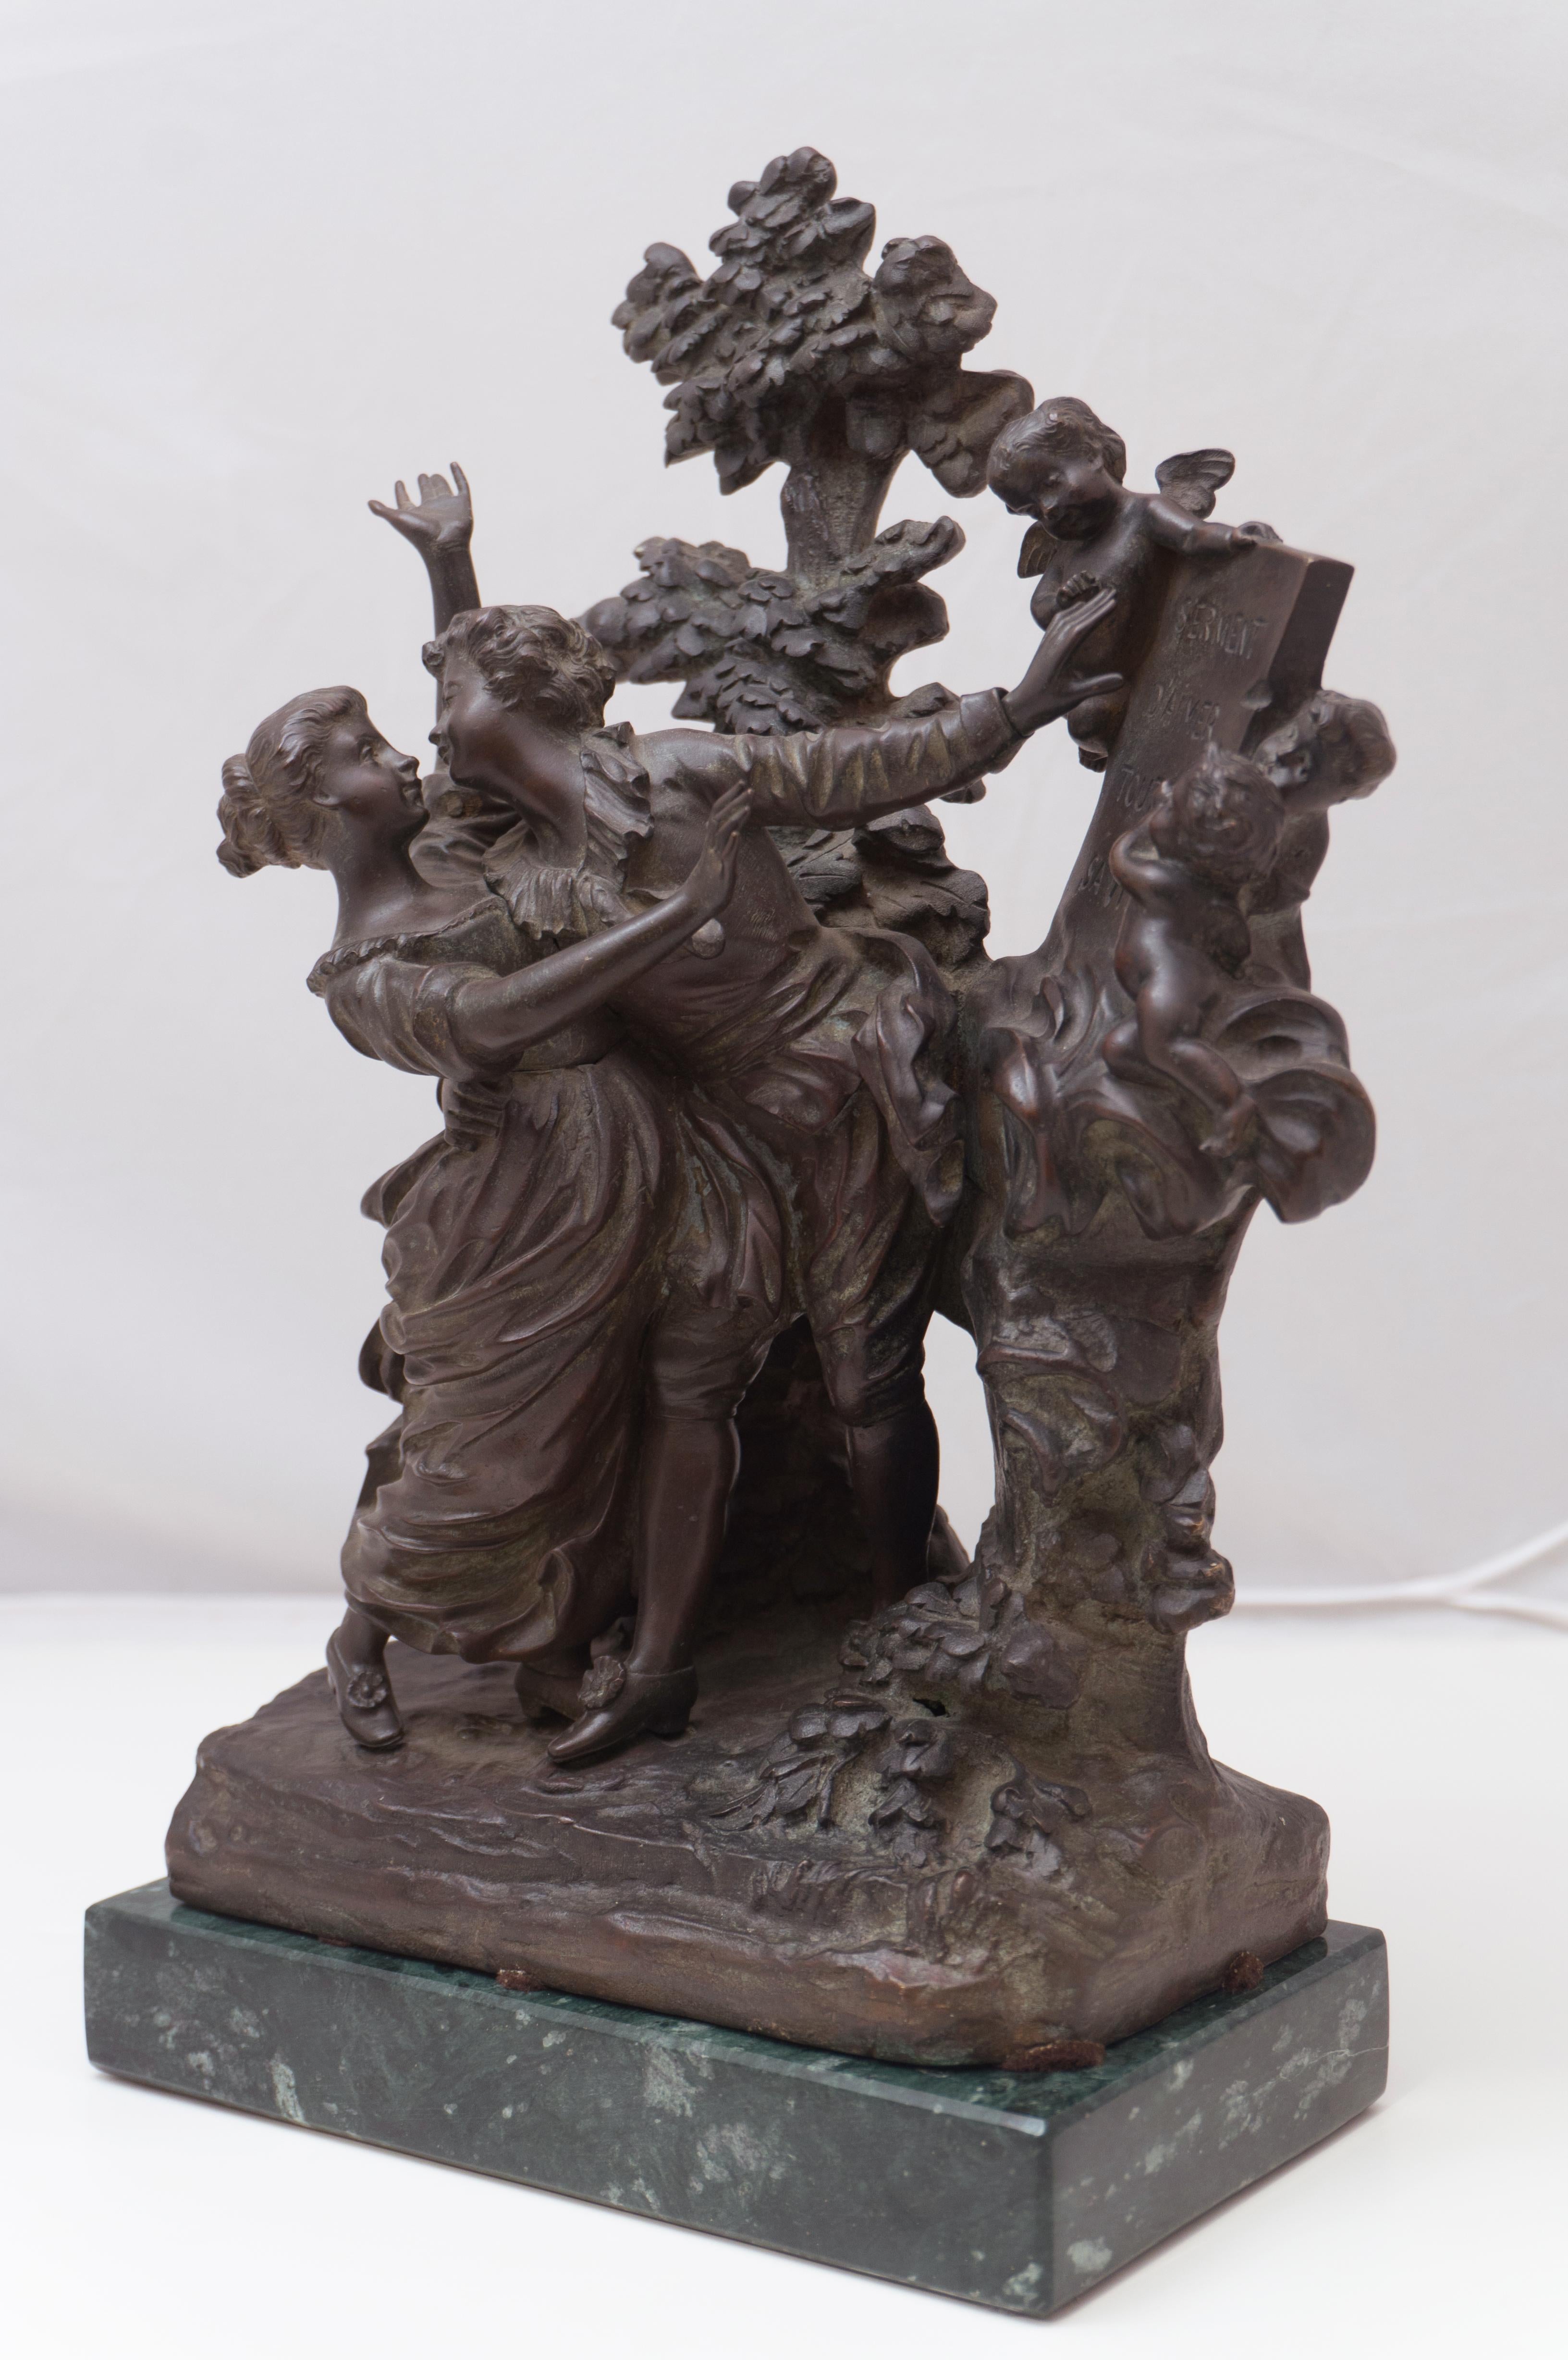  'The Kiss', Two Young Lovers Embracing, French Lost Wax Bronze Figural Group  - Rococo Sculpture by Georges Flamand